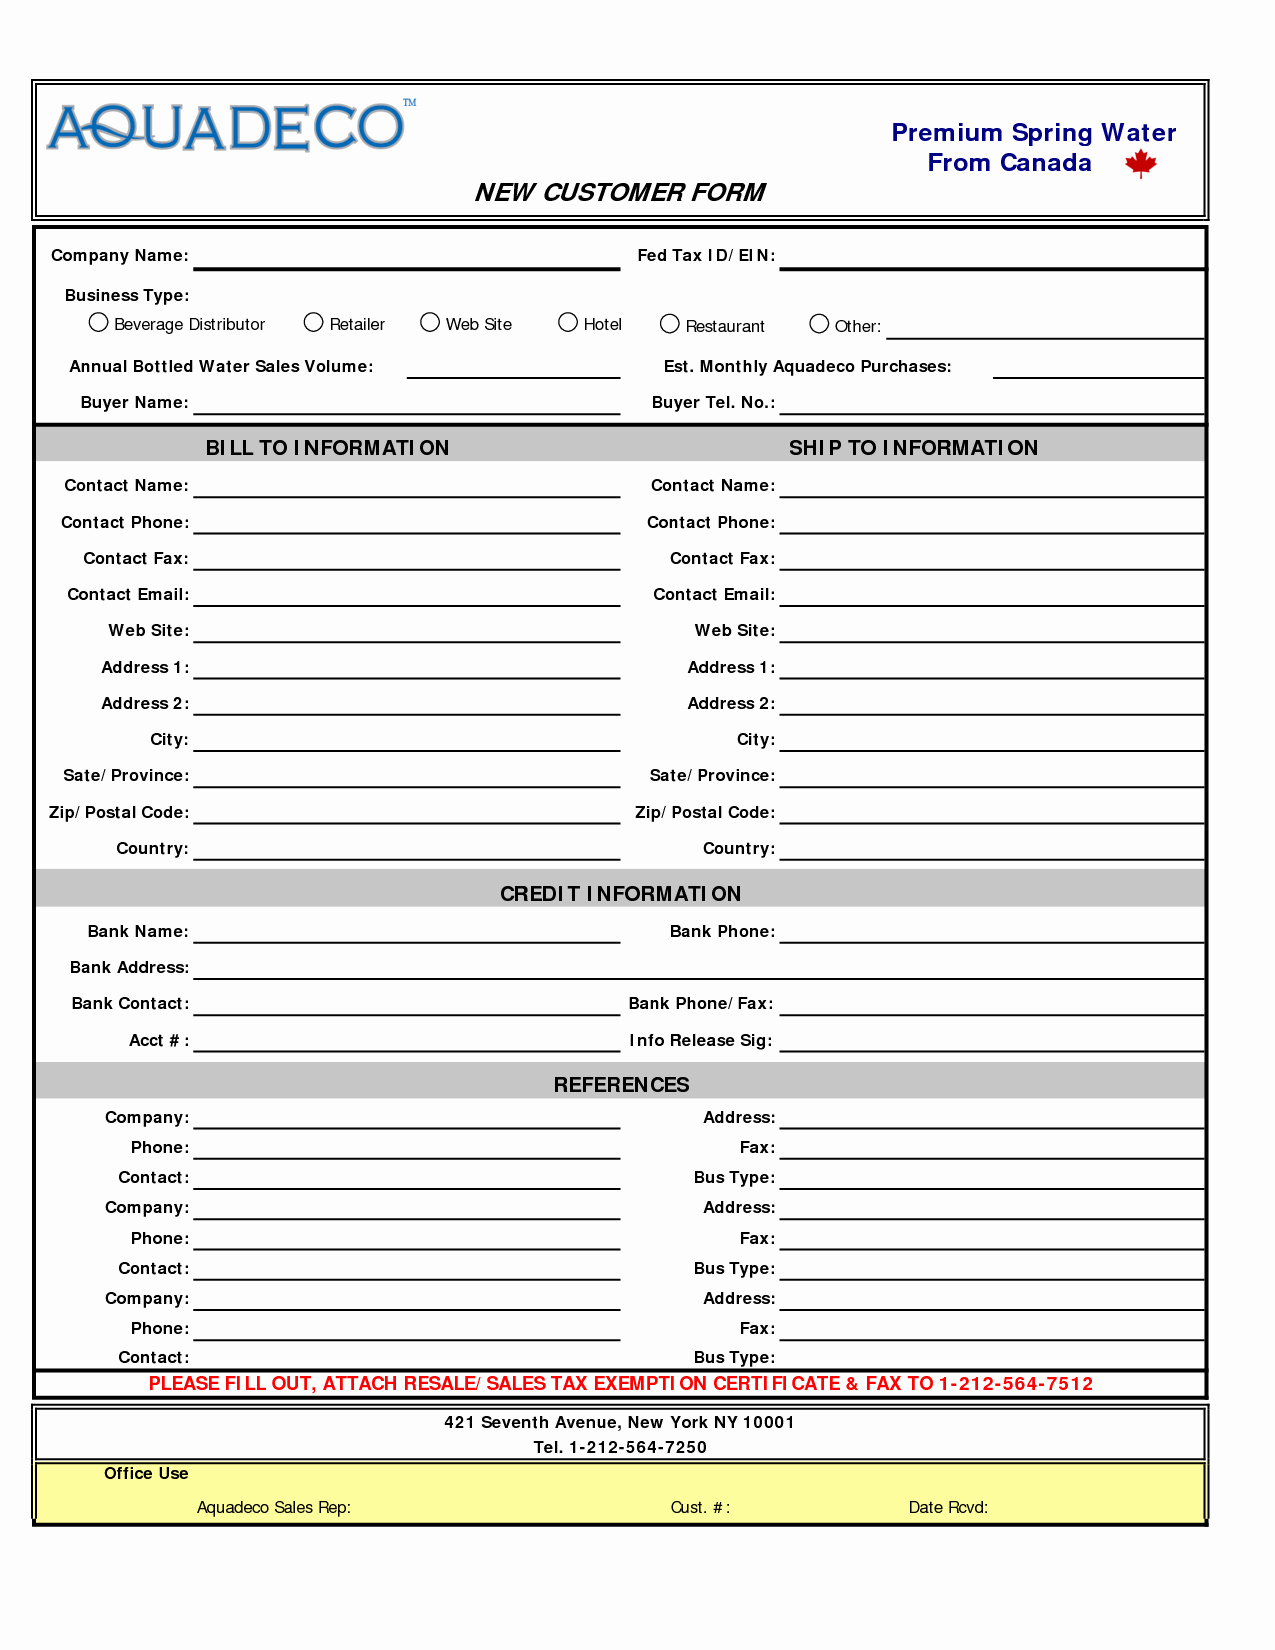 New Client form Template Awesome Best S Of New Client Information form Template New